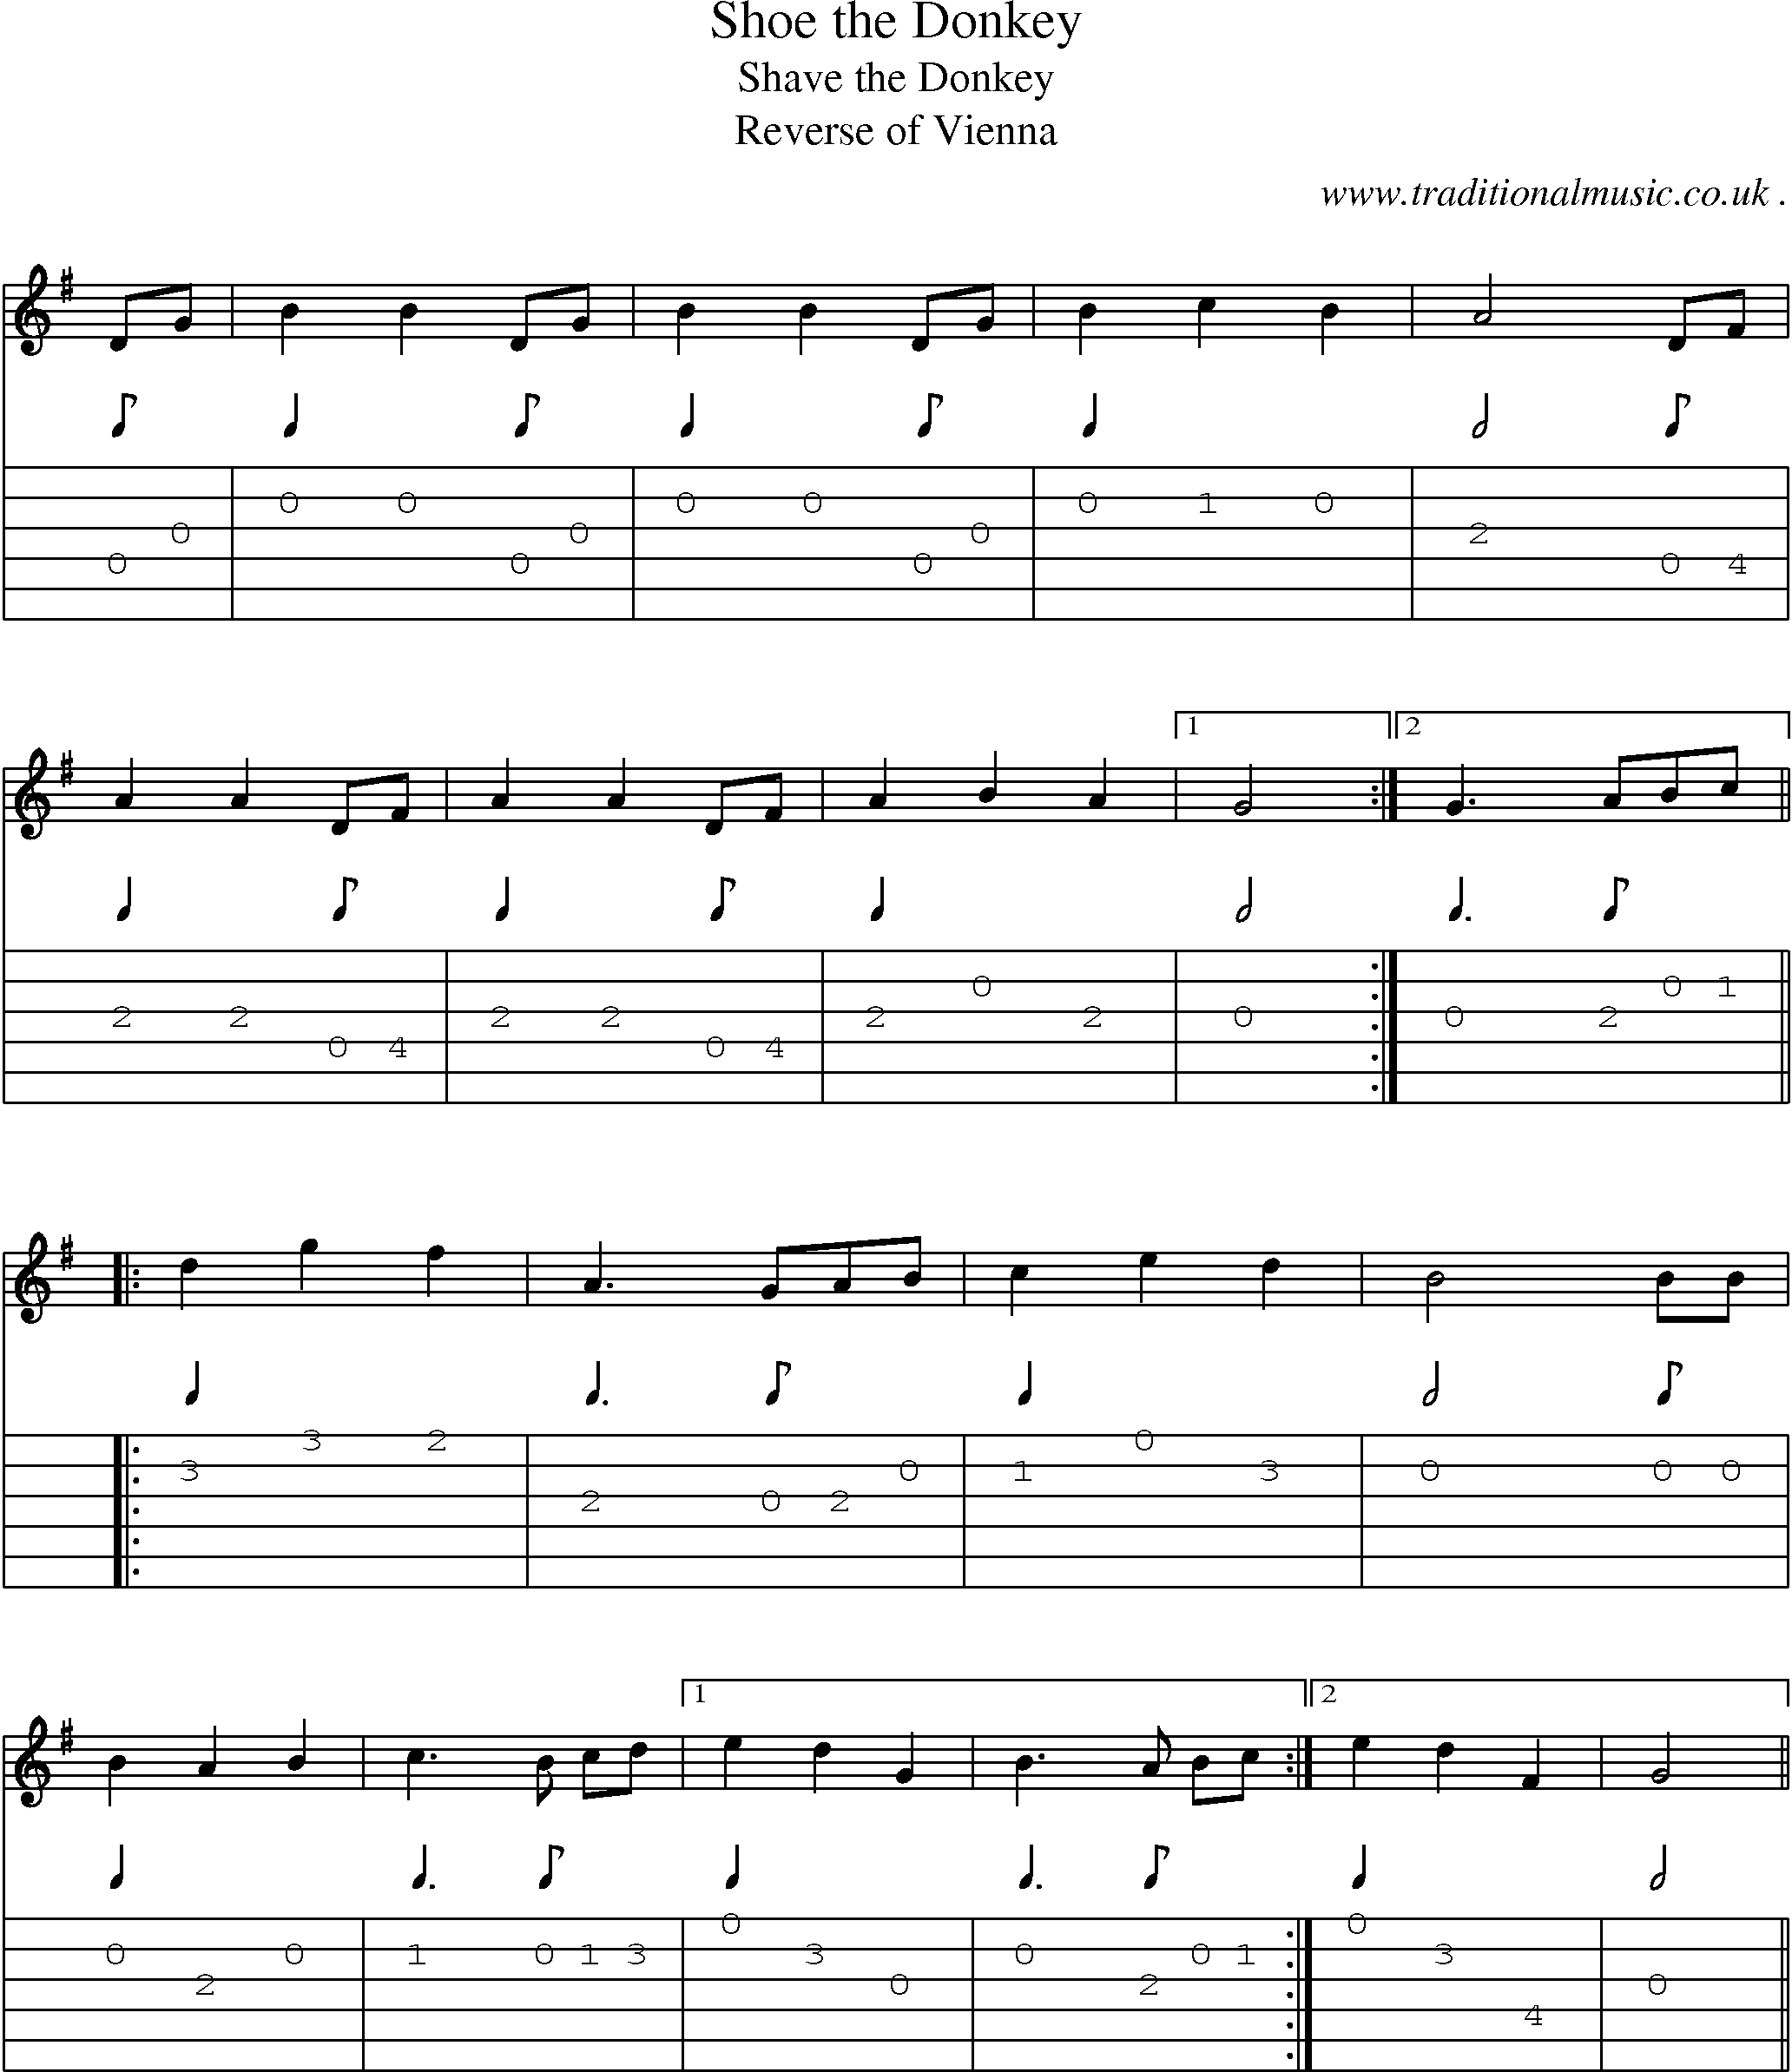 Sheet-Music and Guitar Tabs for Shoe The Donkey